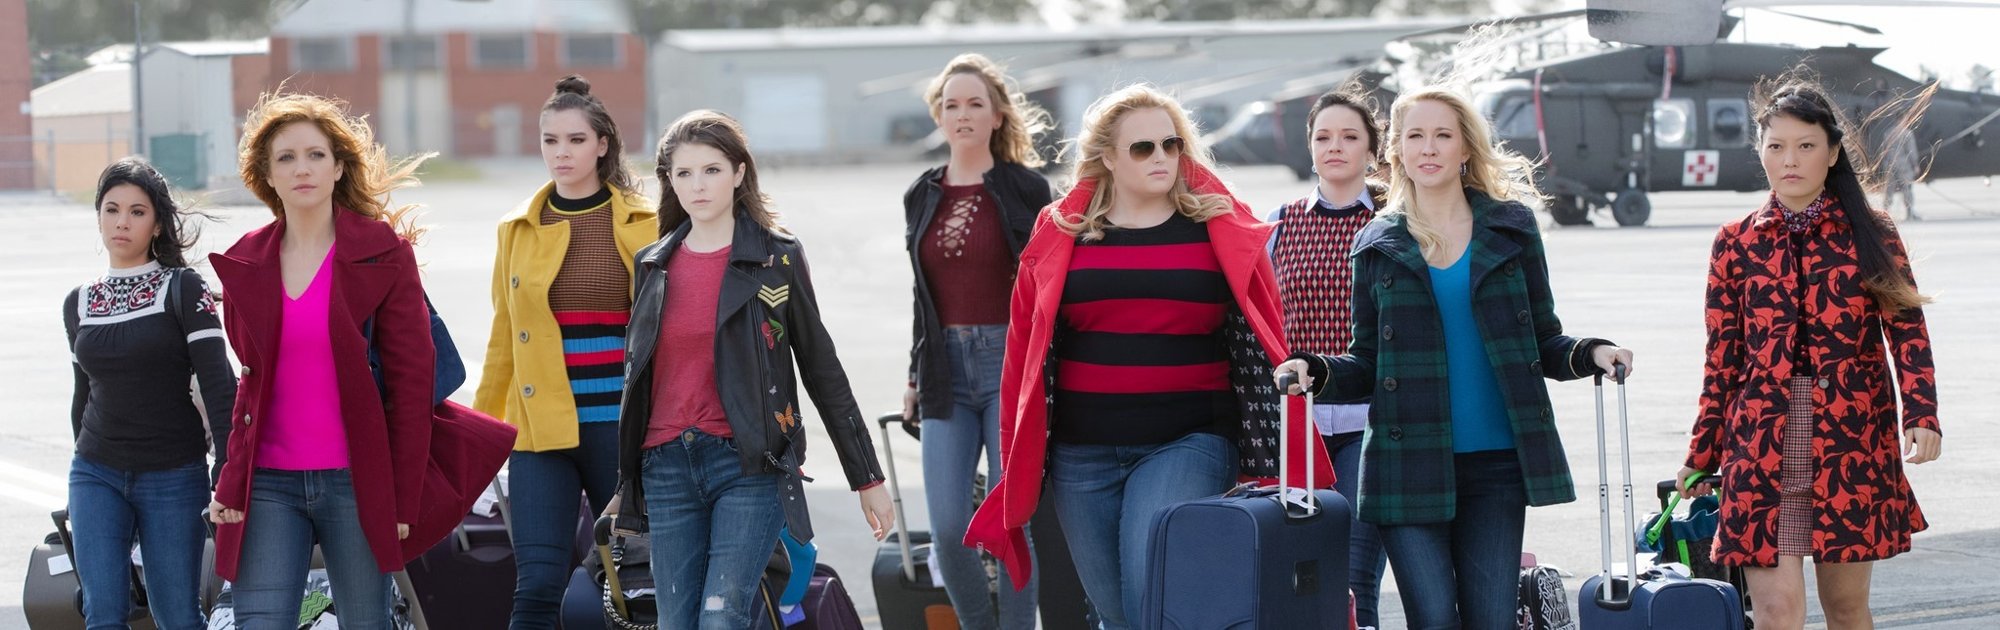 Brittany Snow, Hailee Steinfeld, Anna Kendrick and Rebel Wilson in Universal Pictures' Pitch Perfect 3 (2017)